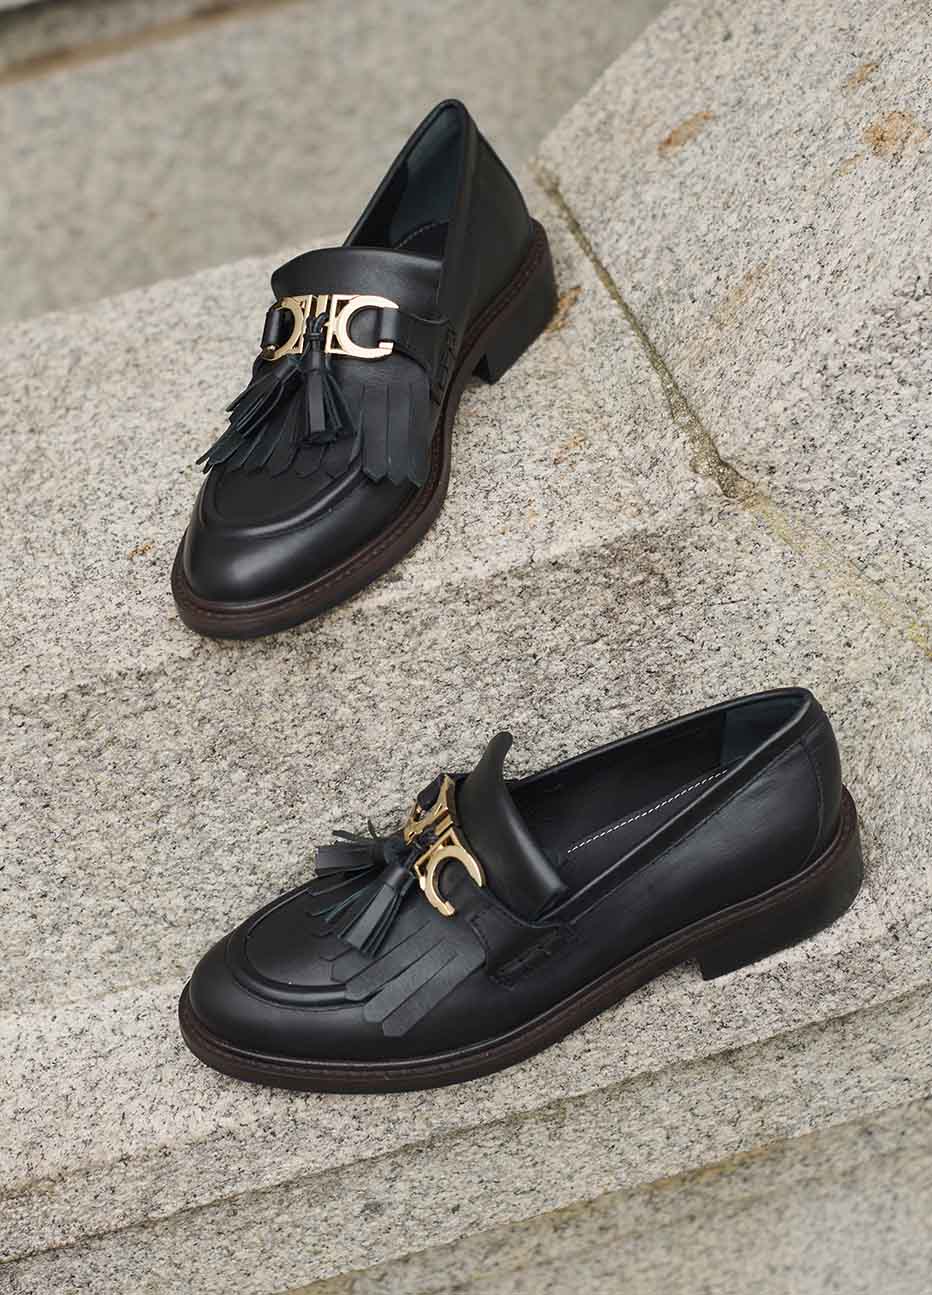 Hobbs women’s black leather loafers.